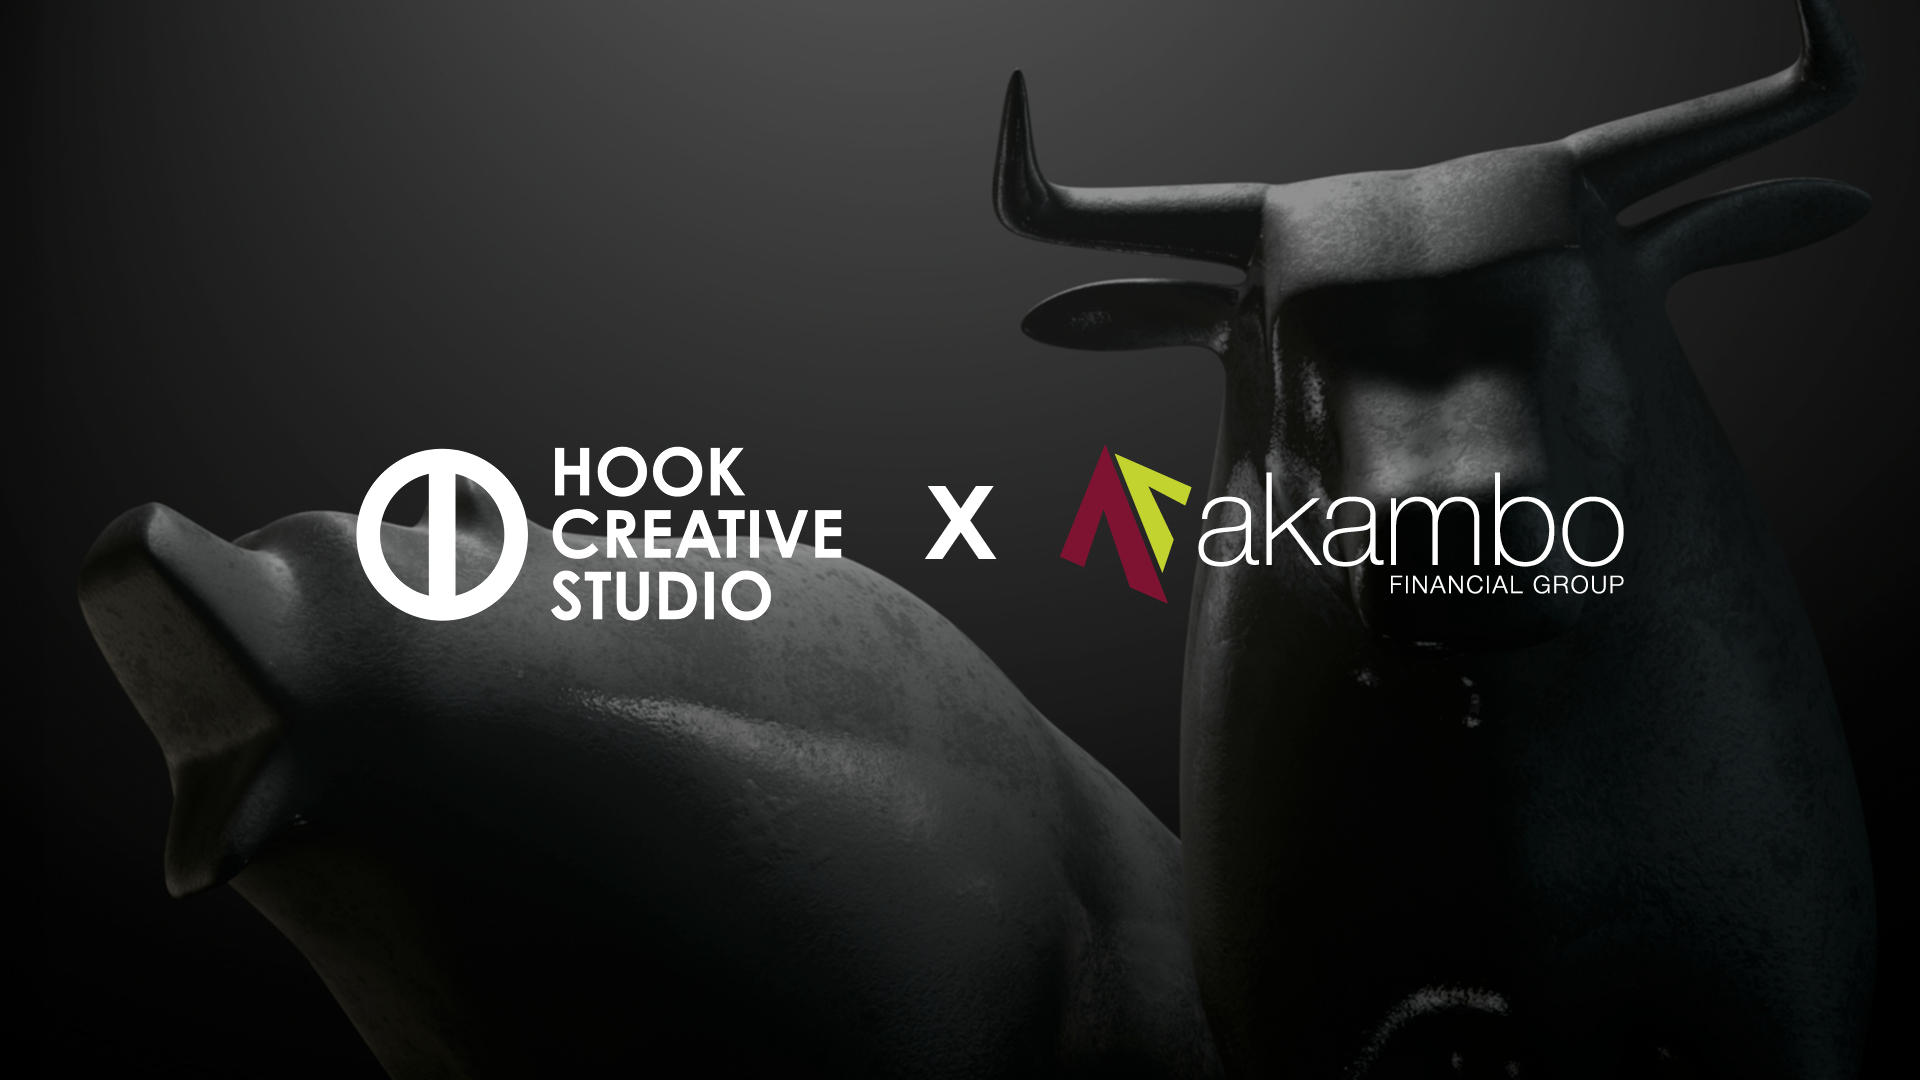 Hook Creative Studio tapped by Akambo Financial Group for creative and media duties [Video]